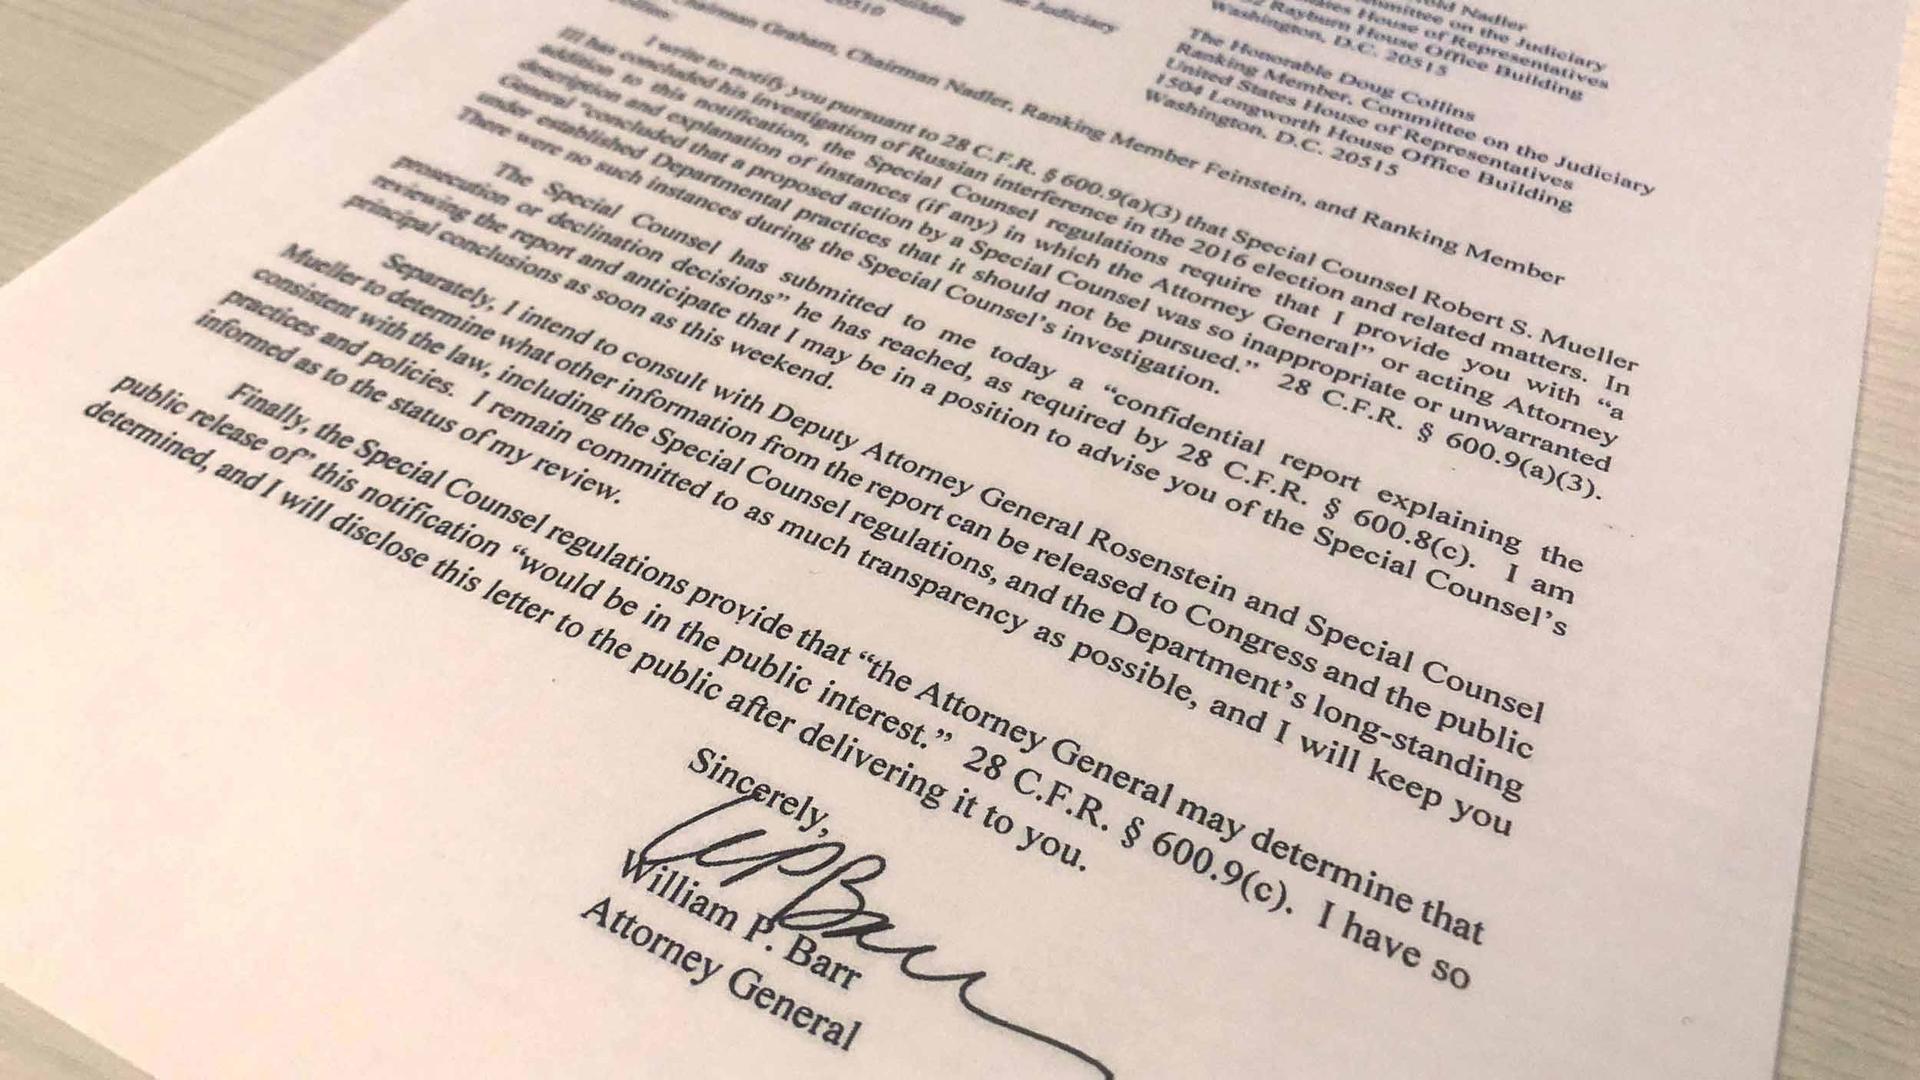 A letter signed by William Barr, US Attorney General